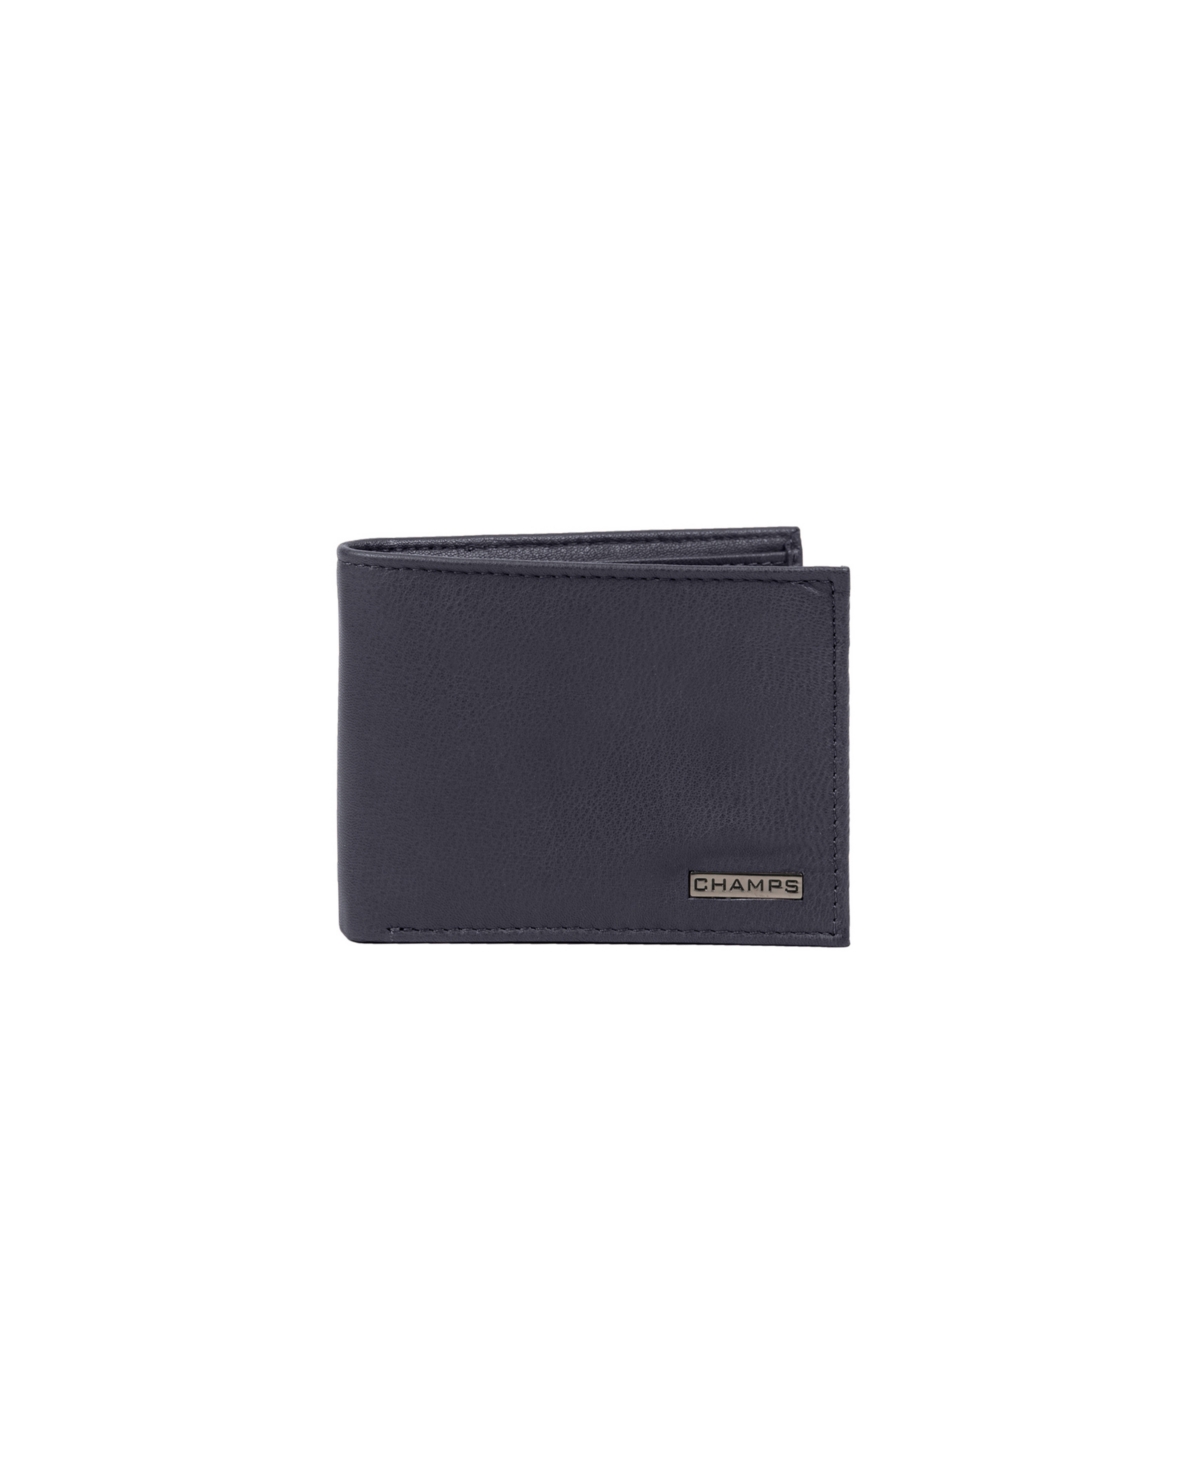 Men's Champs Leather Rfid Top-Wing Wallet in Gift Box - Navy